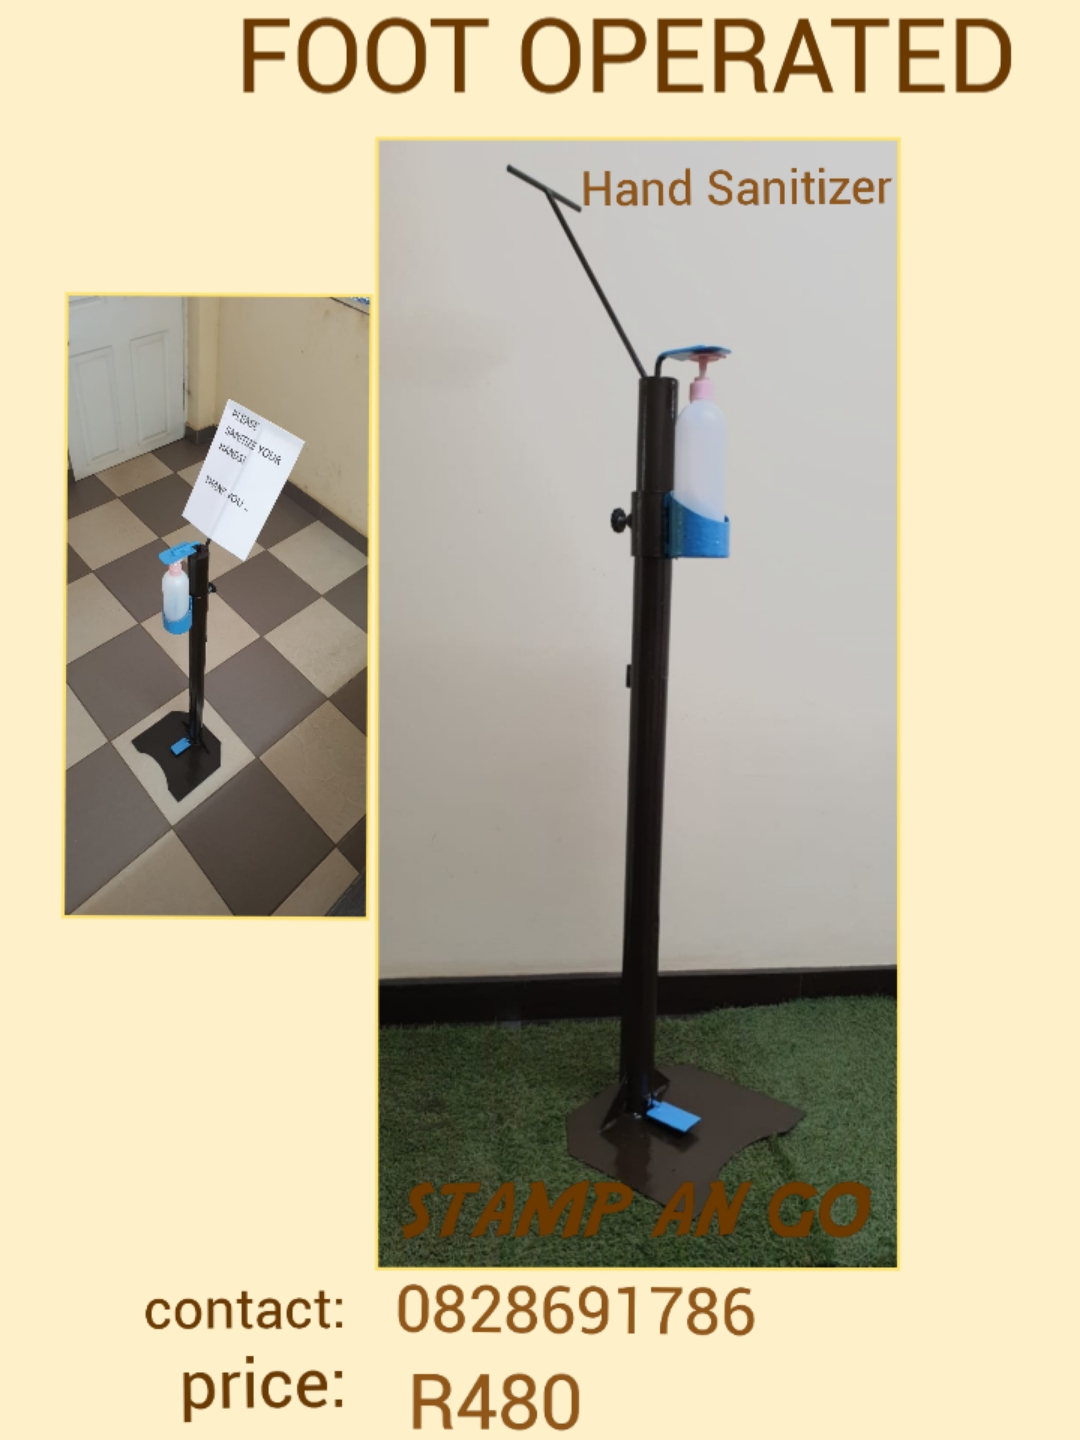 Foot operated hand sanitizer stand